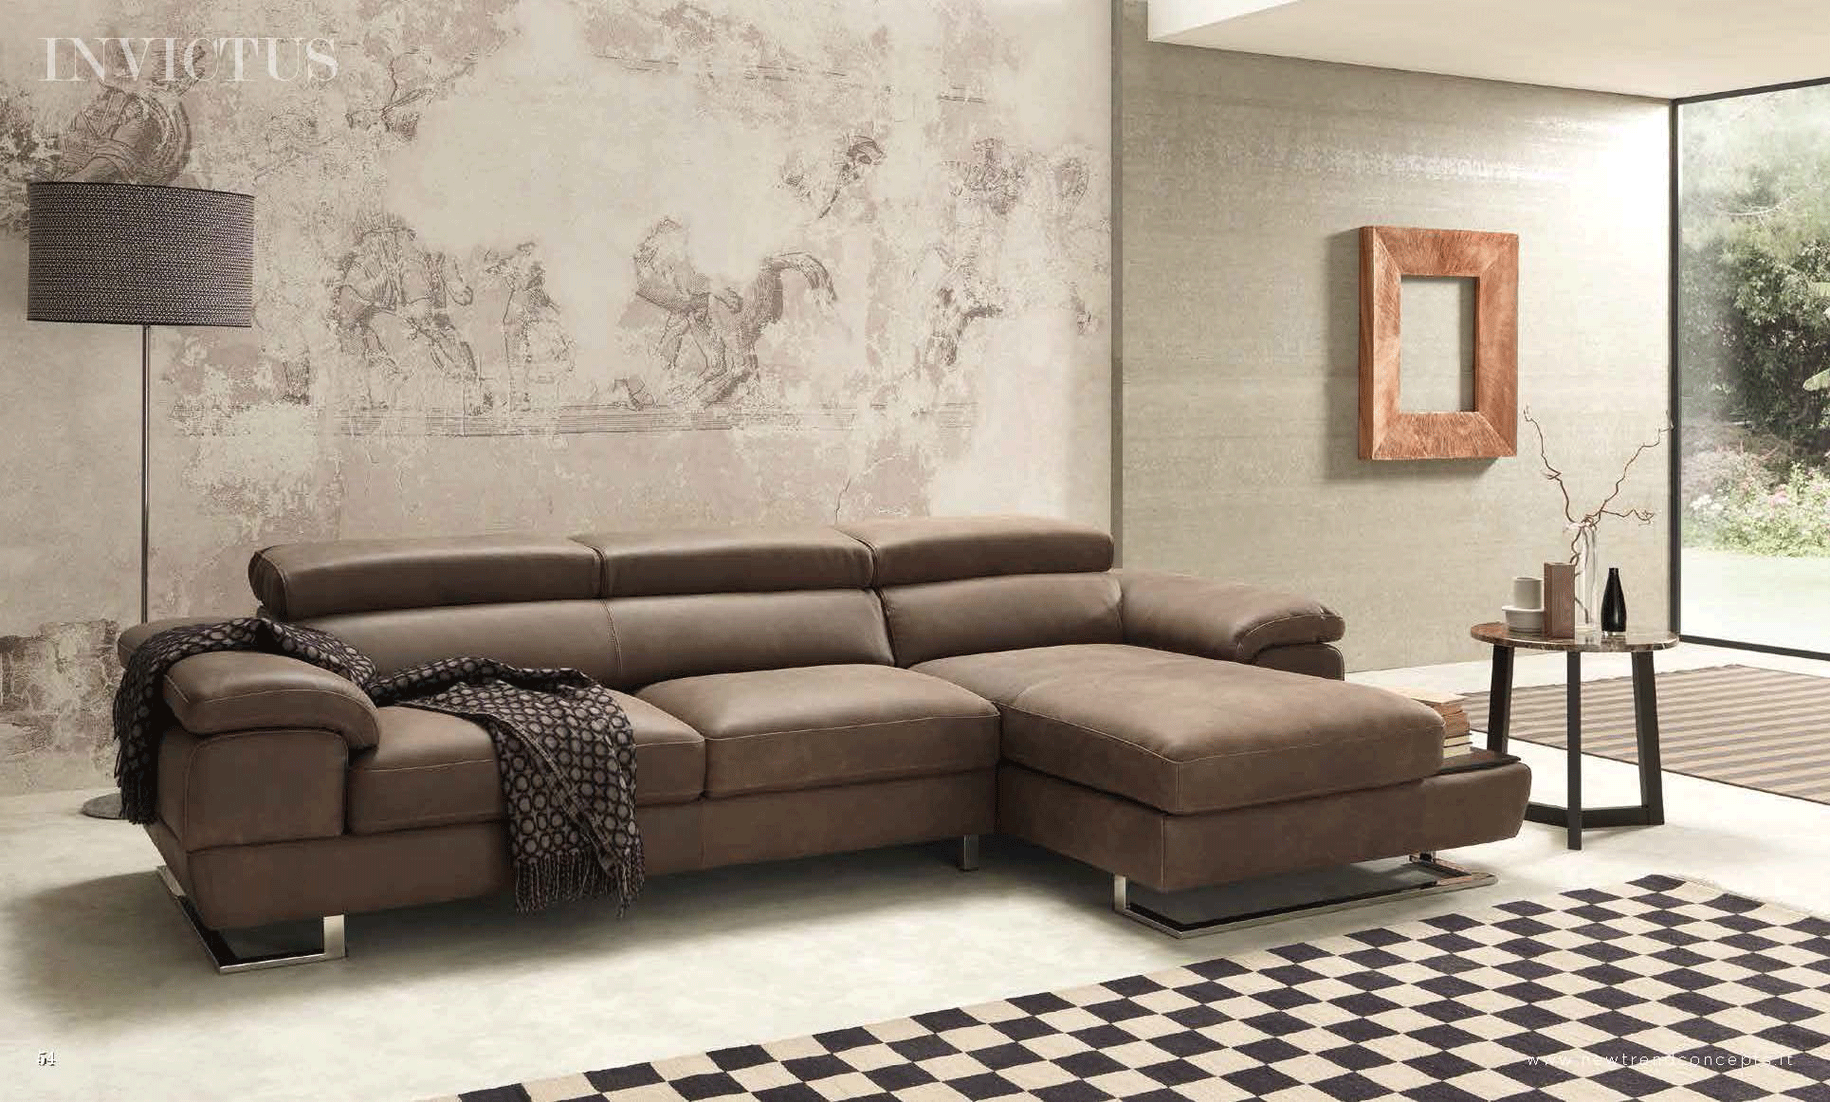 Brands New Trend Concepts Urban Living Room Collection Invictus